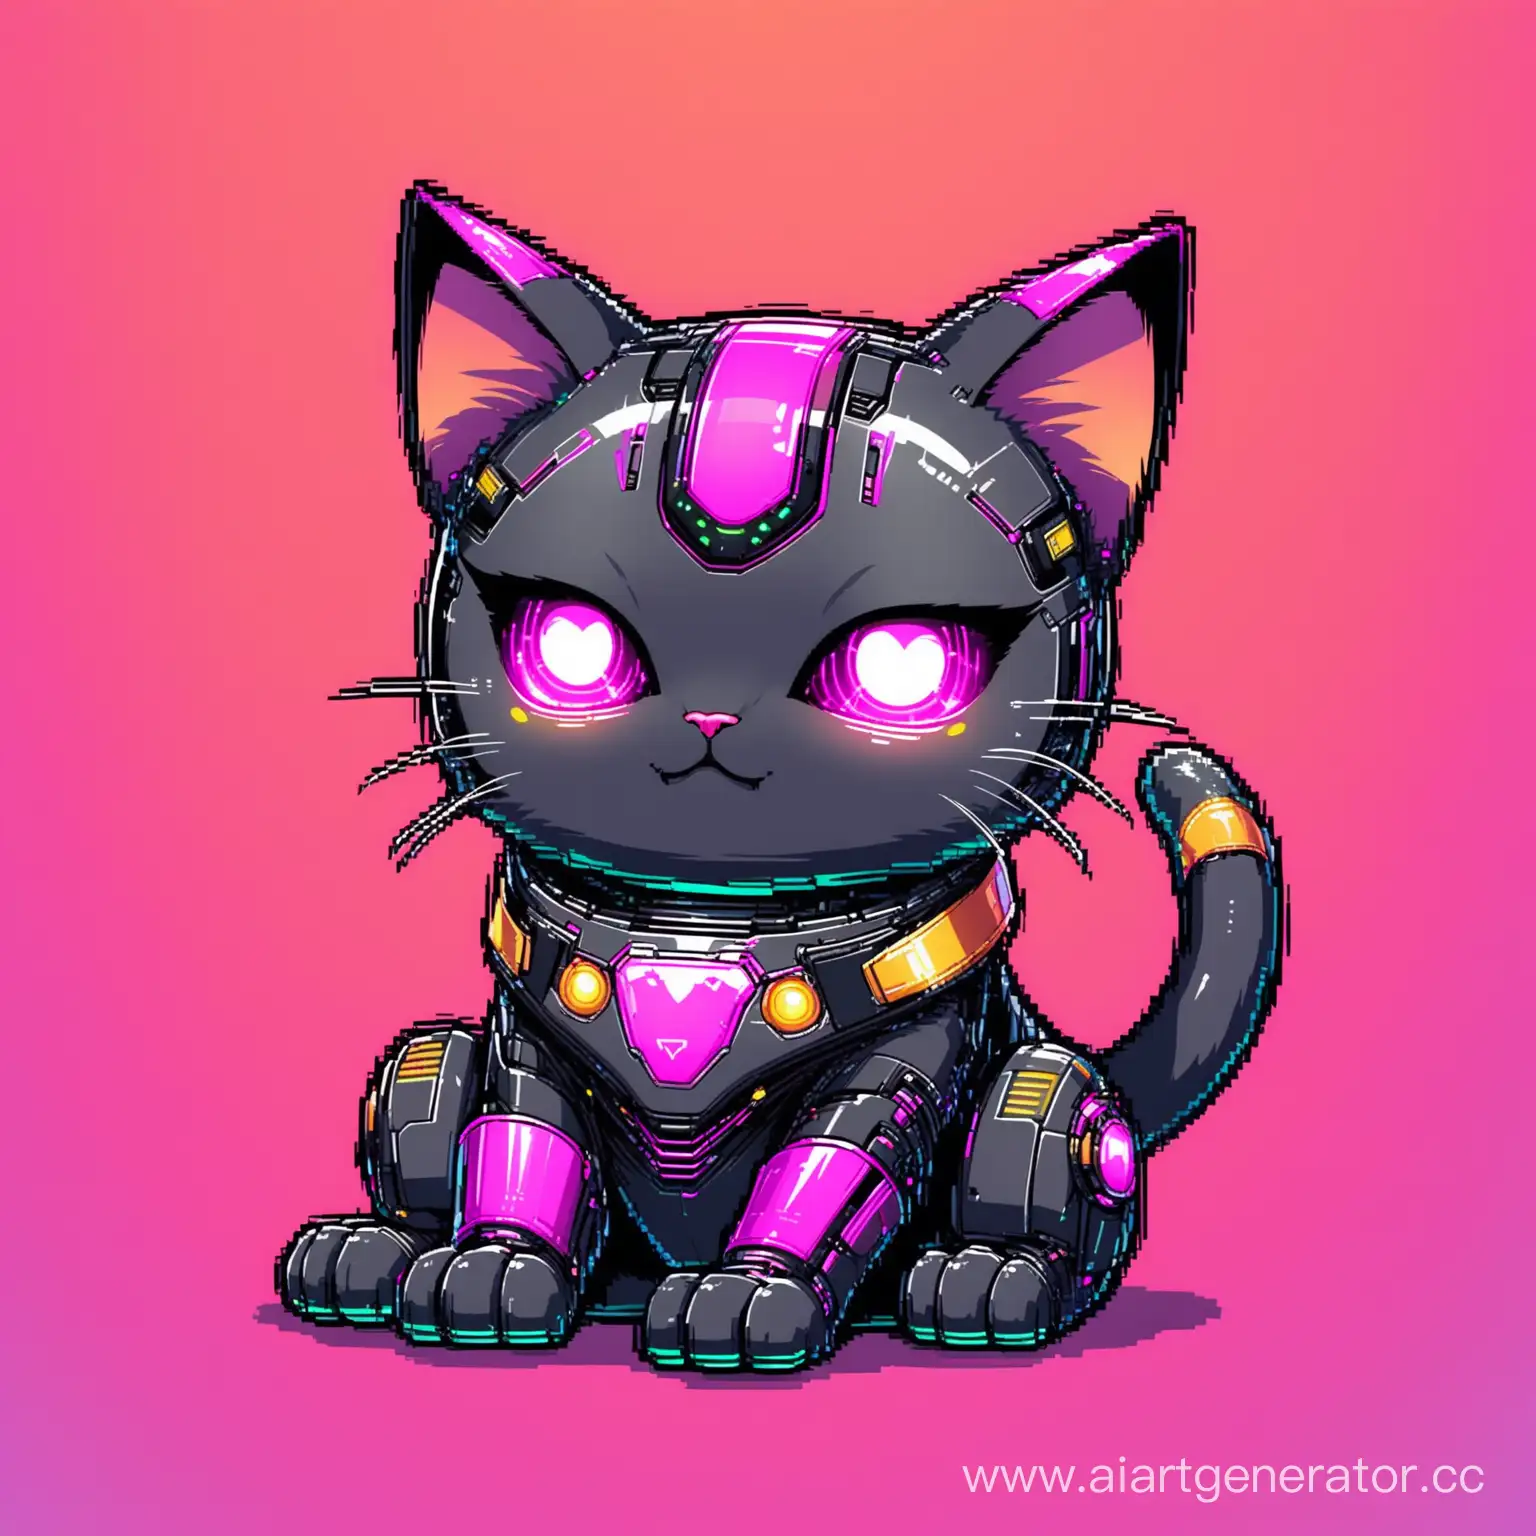 Futuristic-Cyber-Cat-with-Neon-Accents